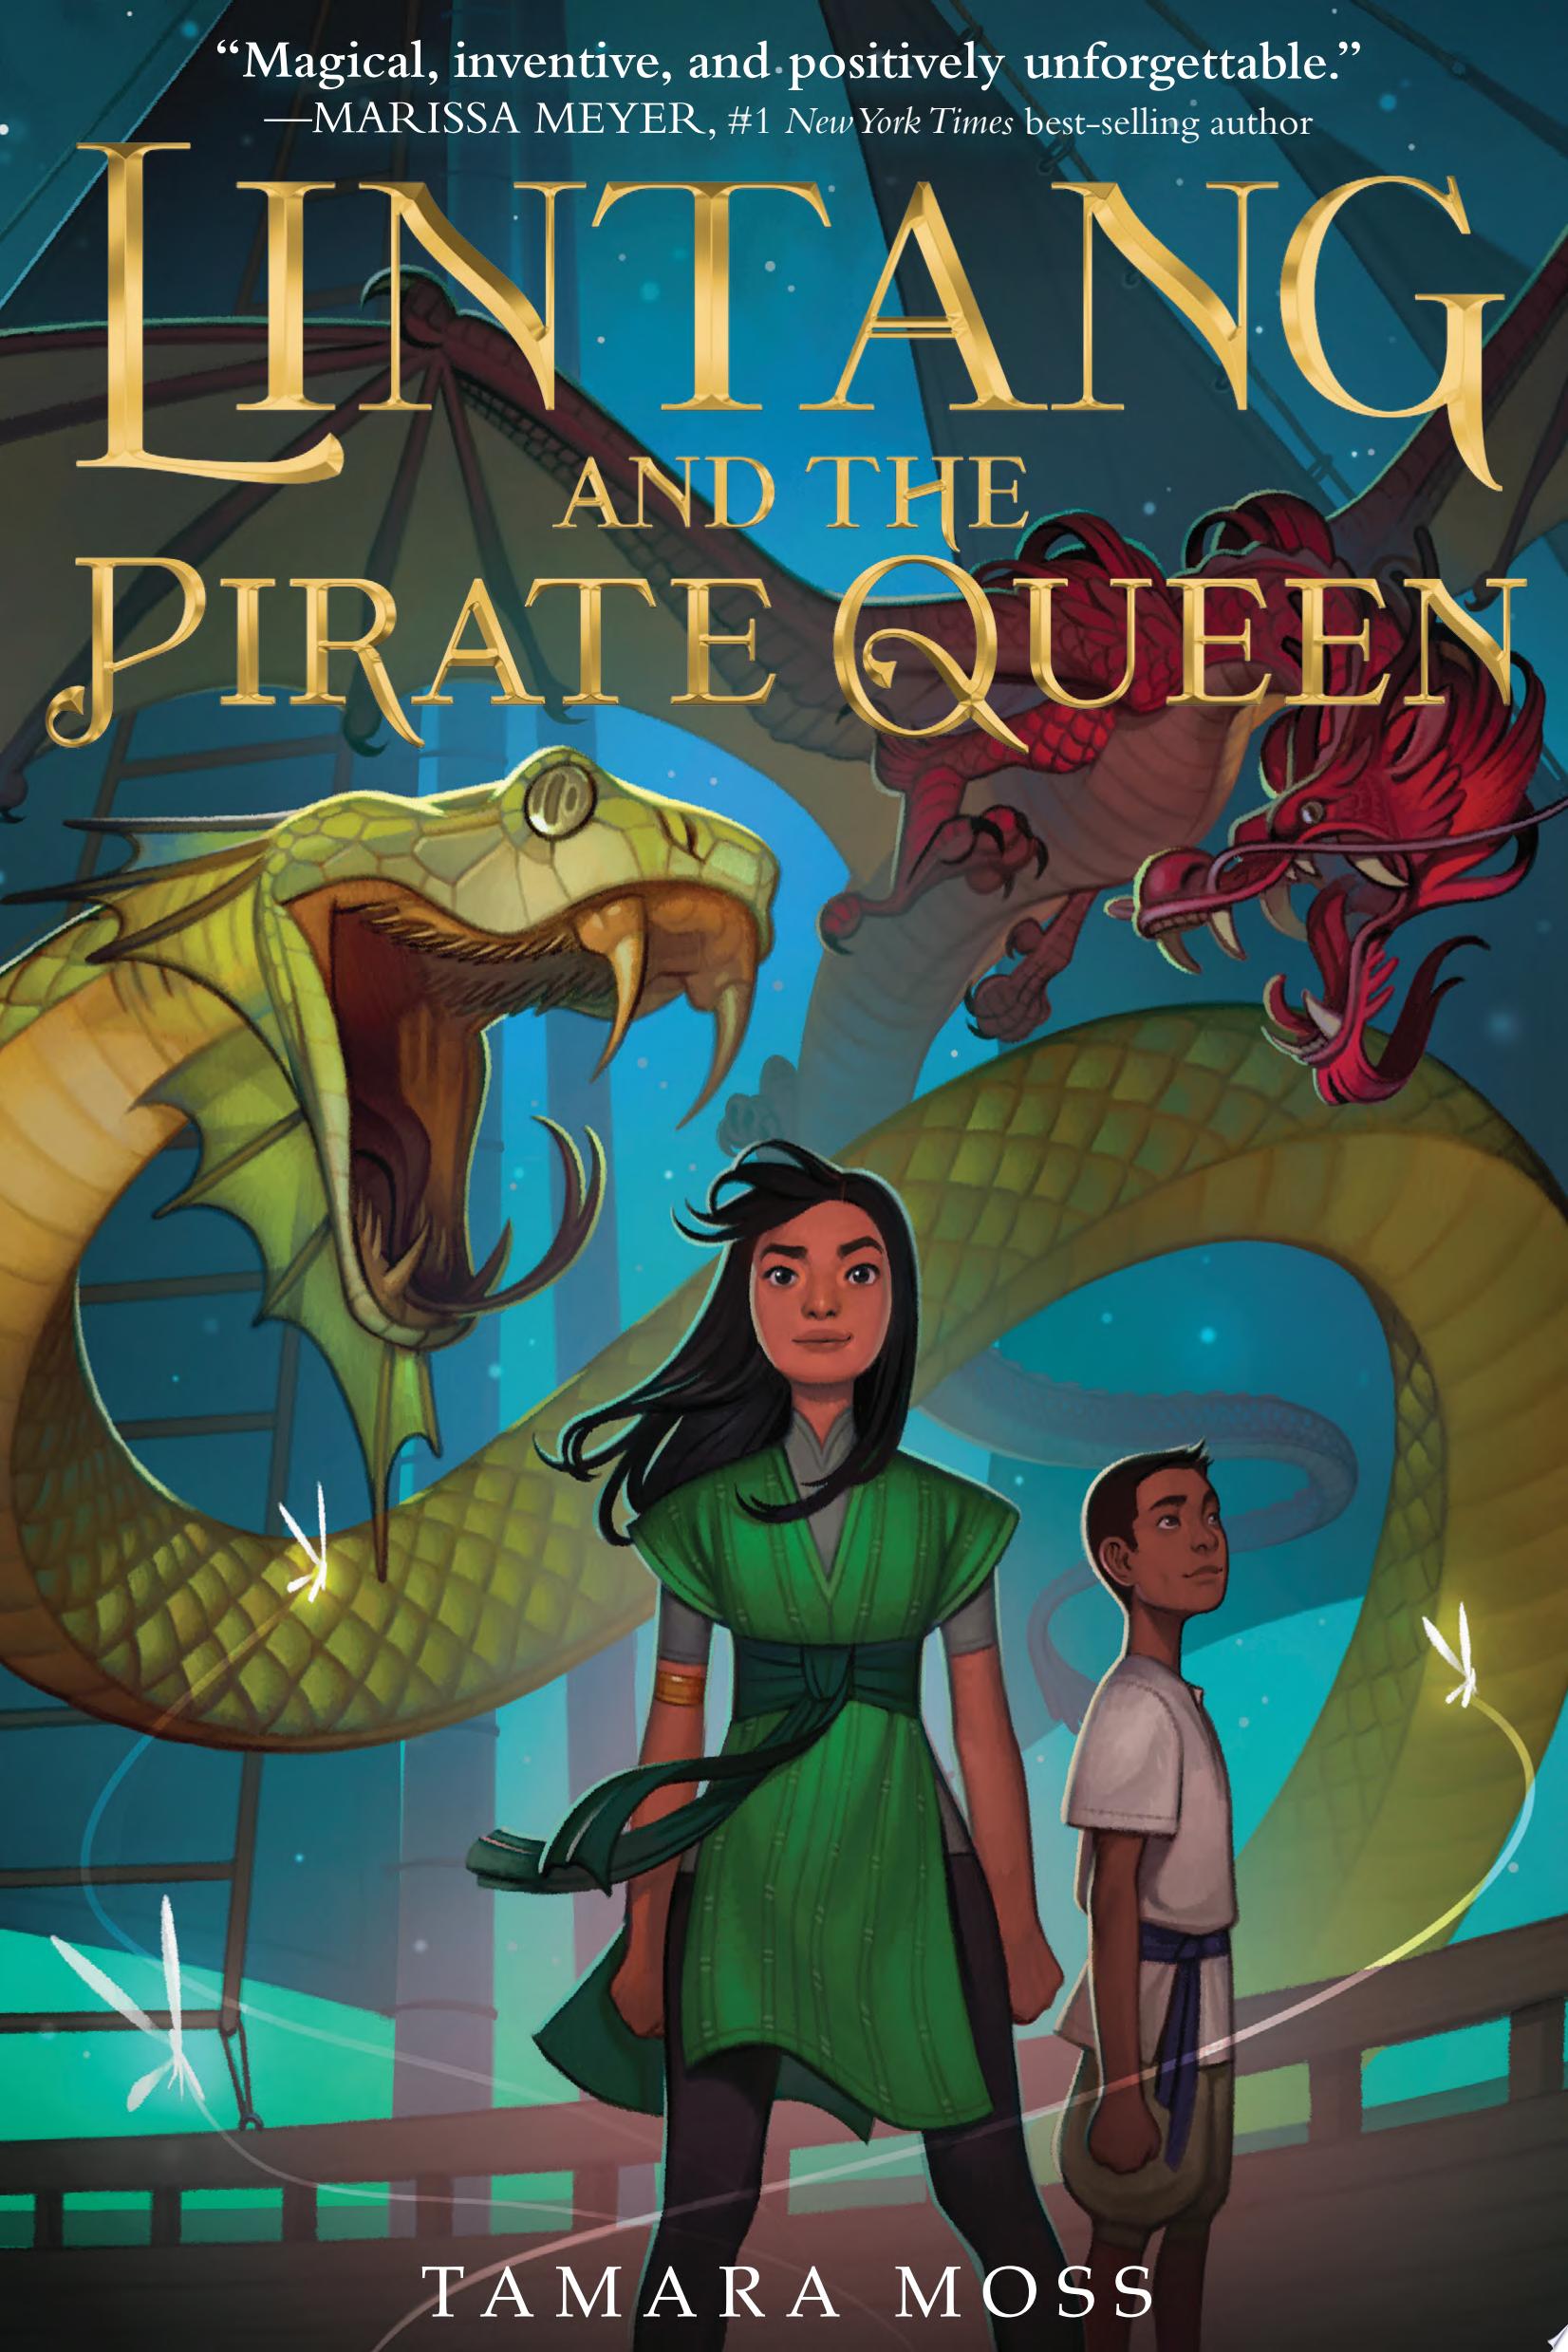 Image for "Lintang and the Pirate Queen"